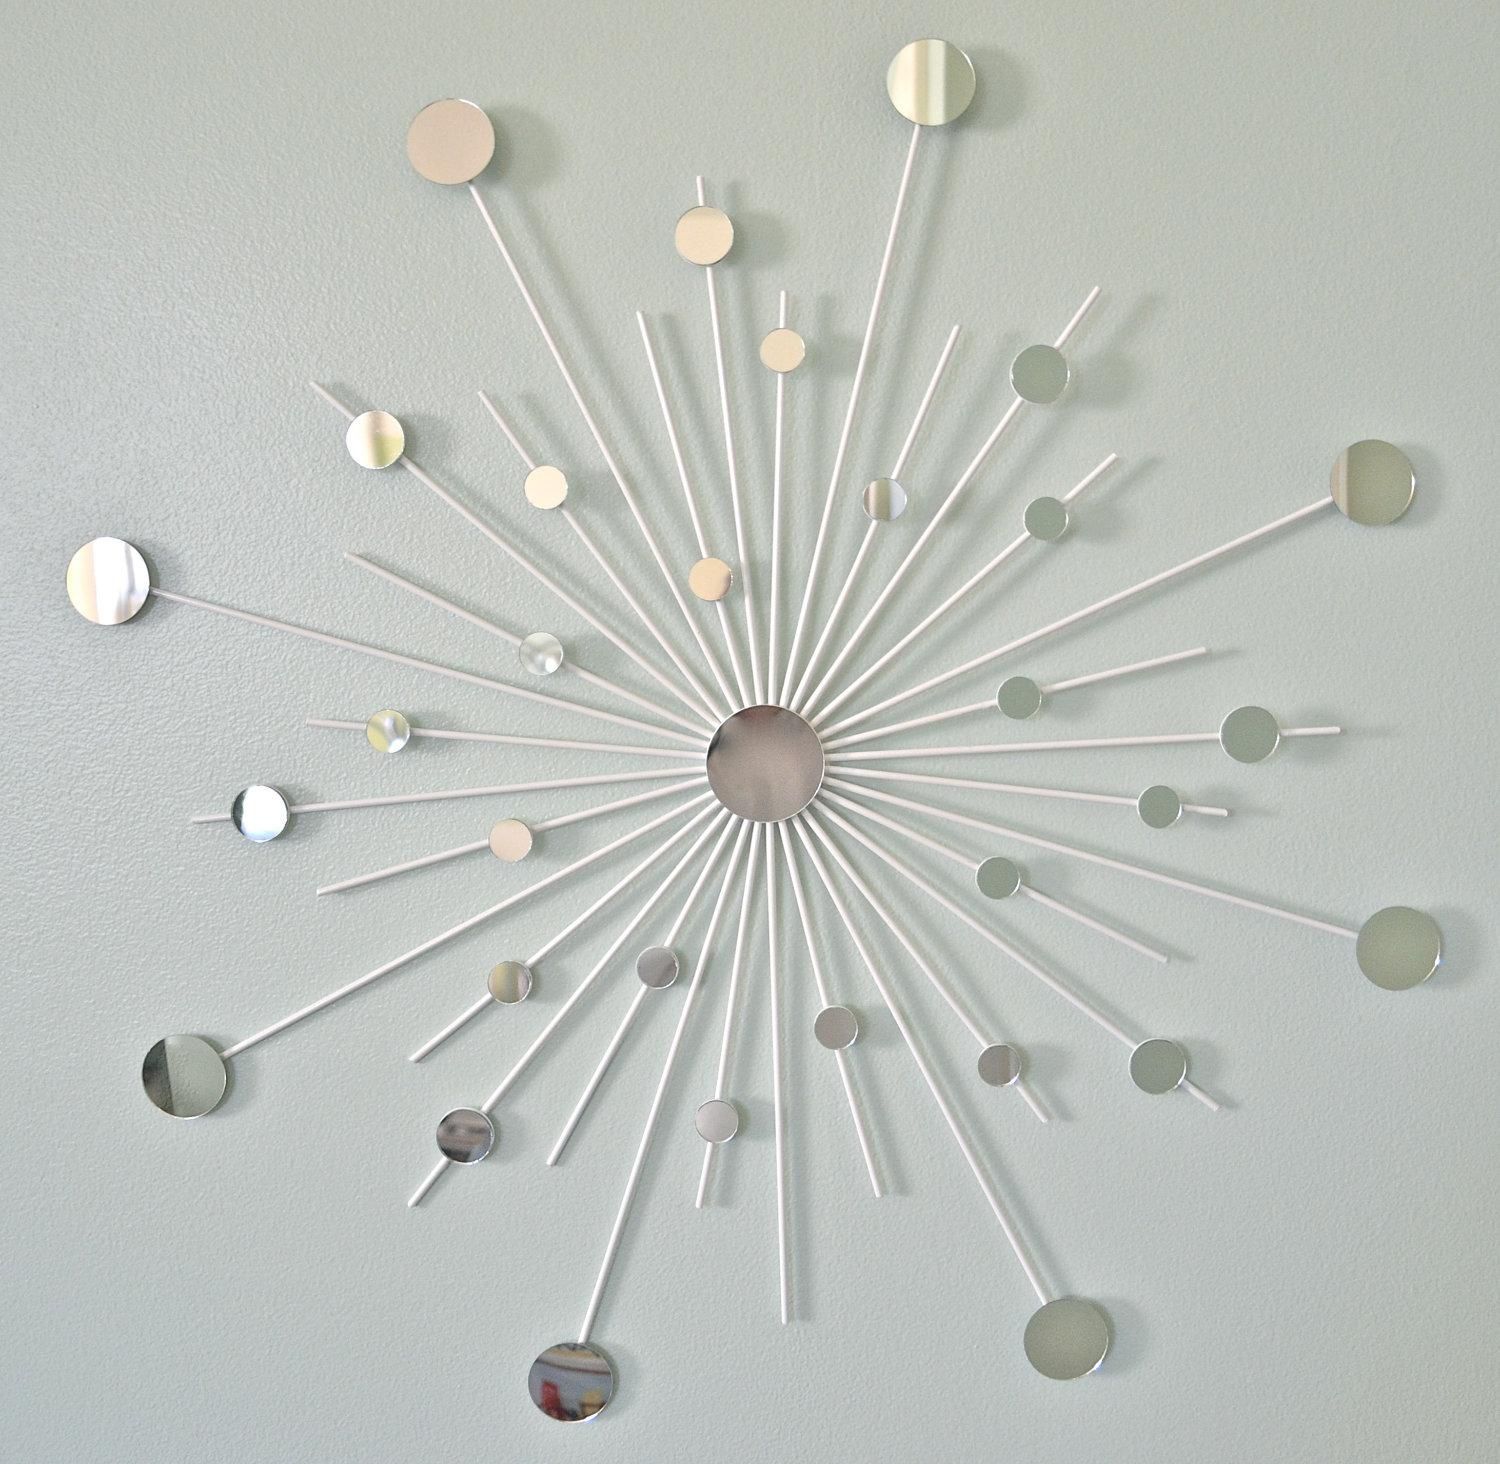 Sunburst Wall Mirror Is Magic Mirror — Home Ideas Collection Within Small Silver Mirrors (View 17 of 20)